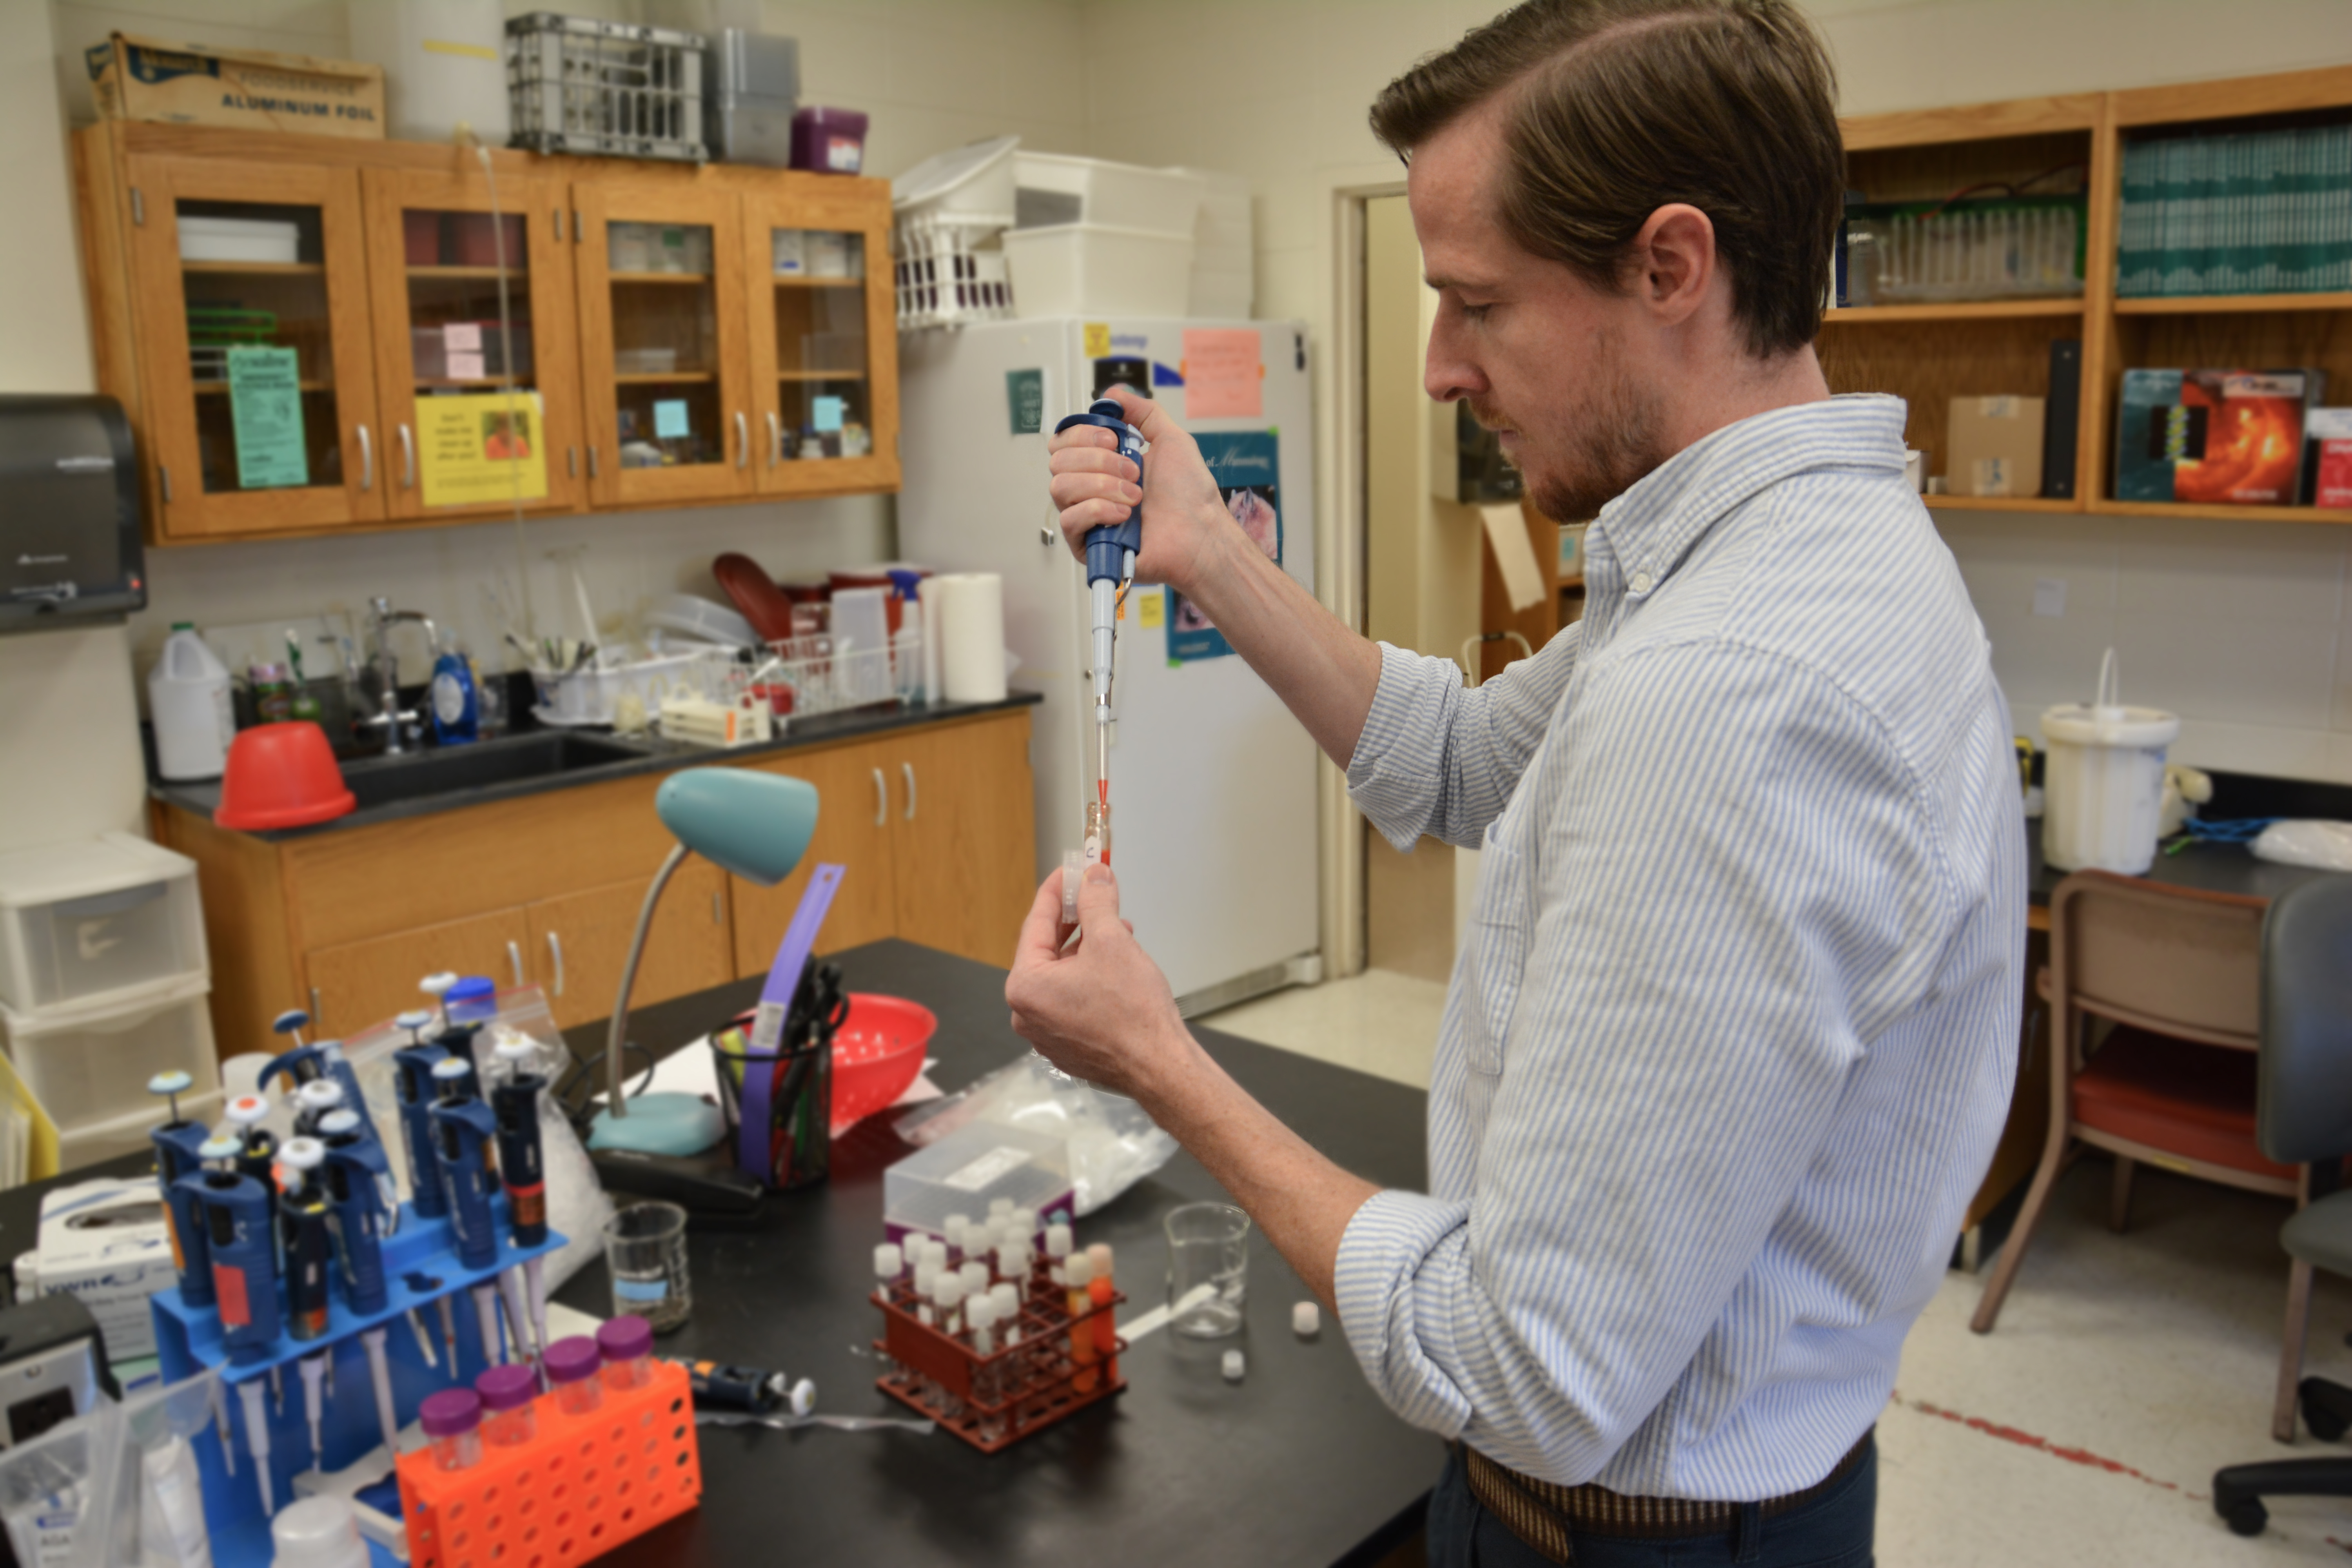 Ryan Weaver using a pipette in the lab